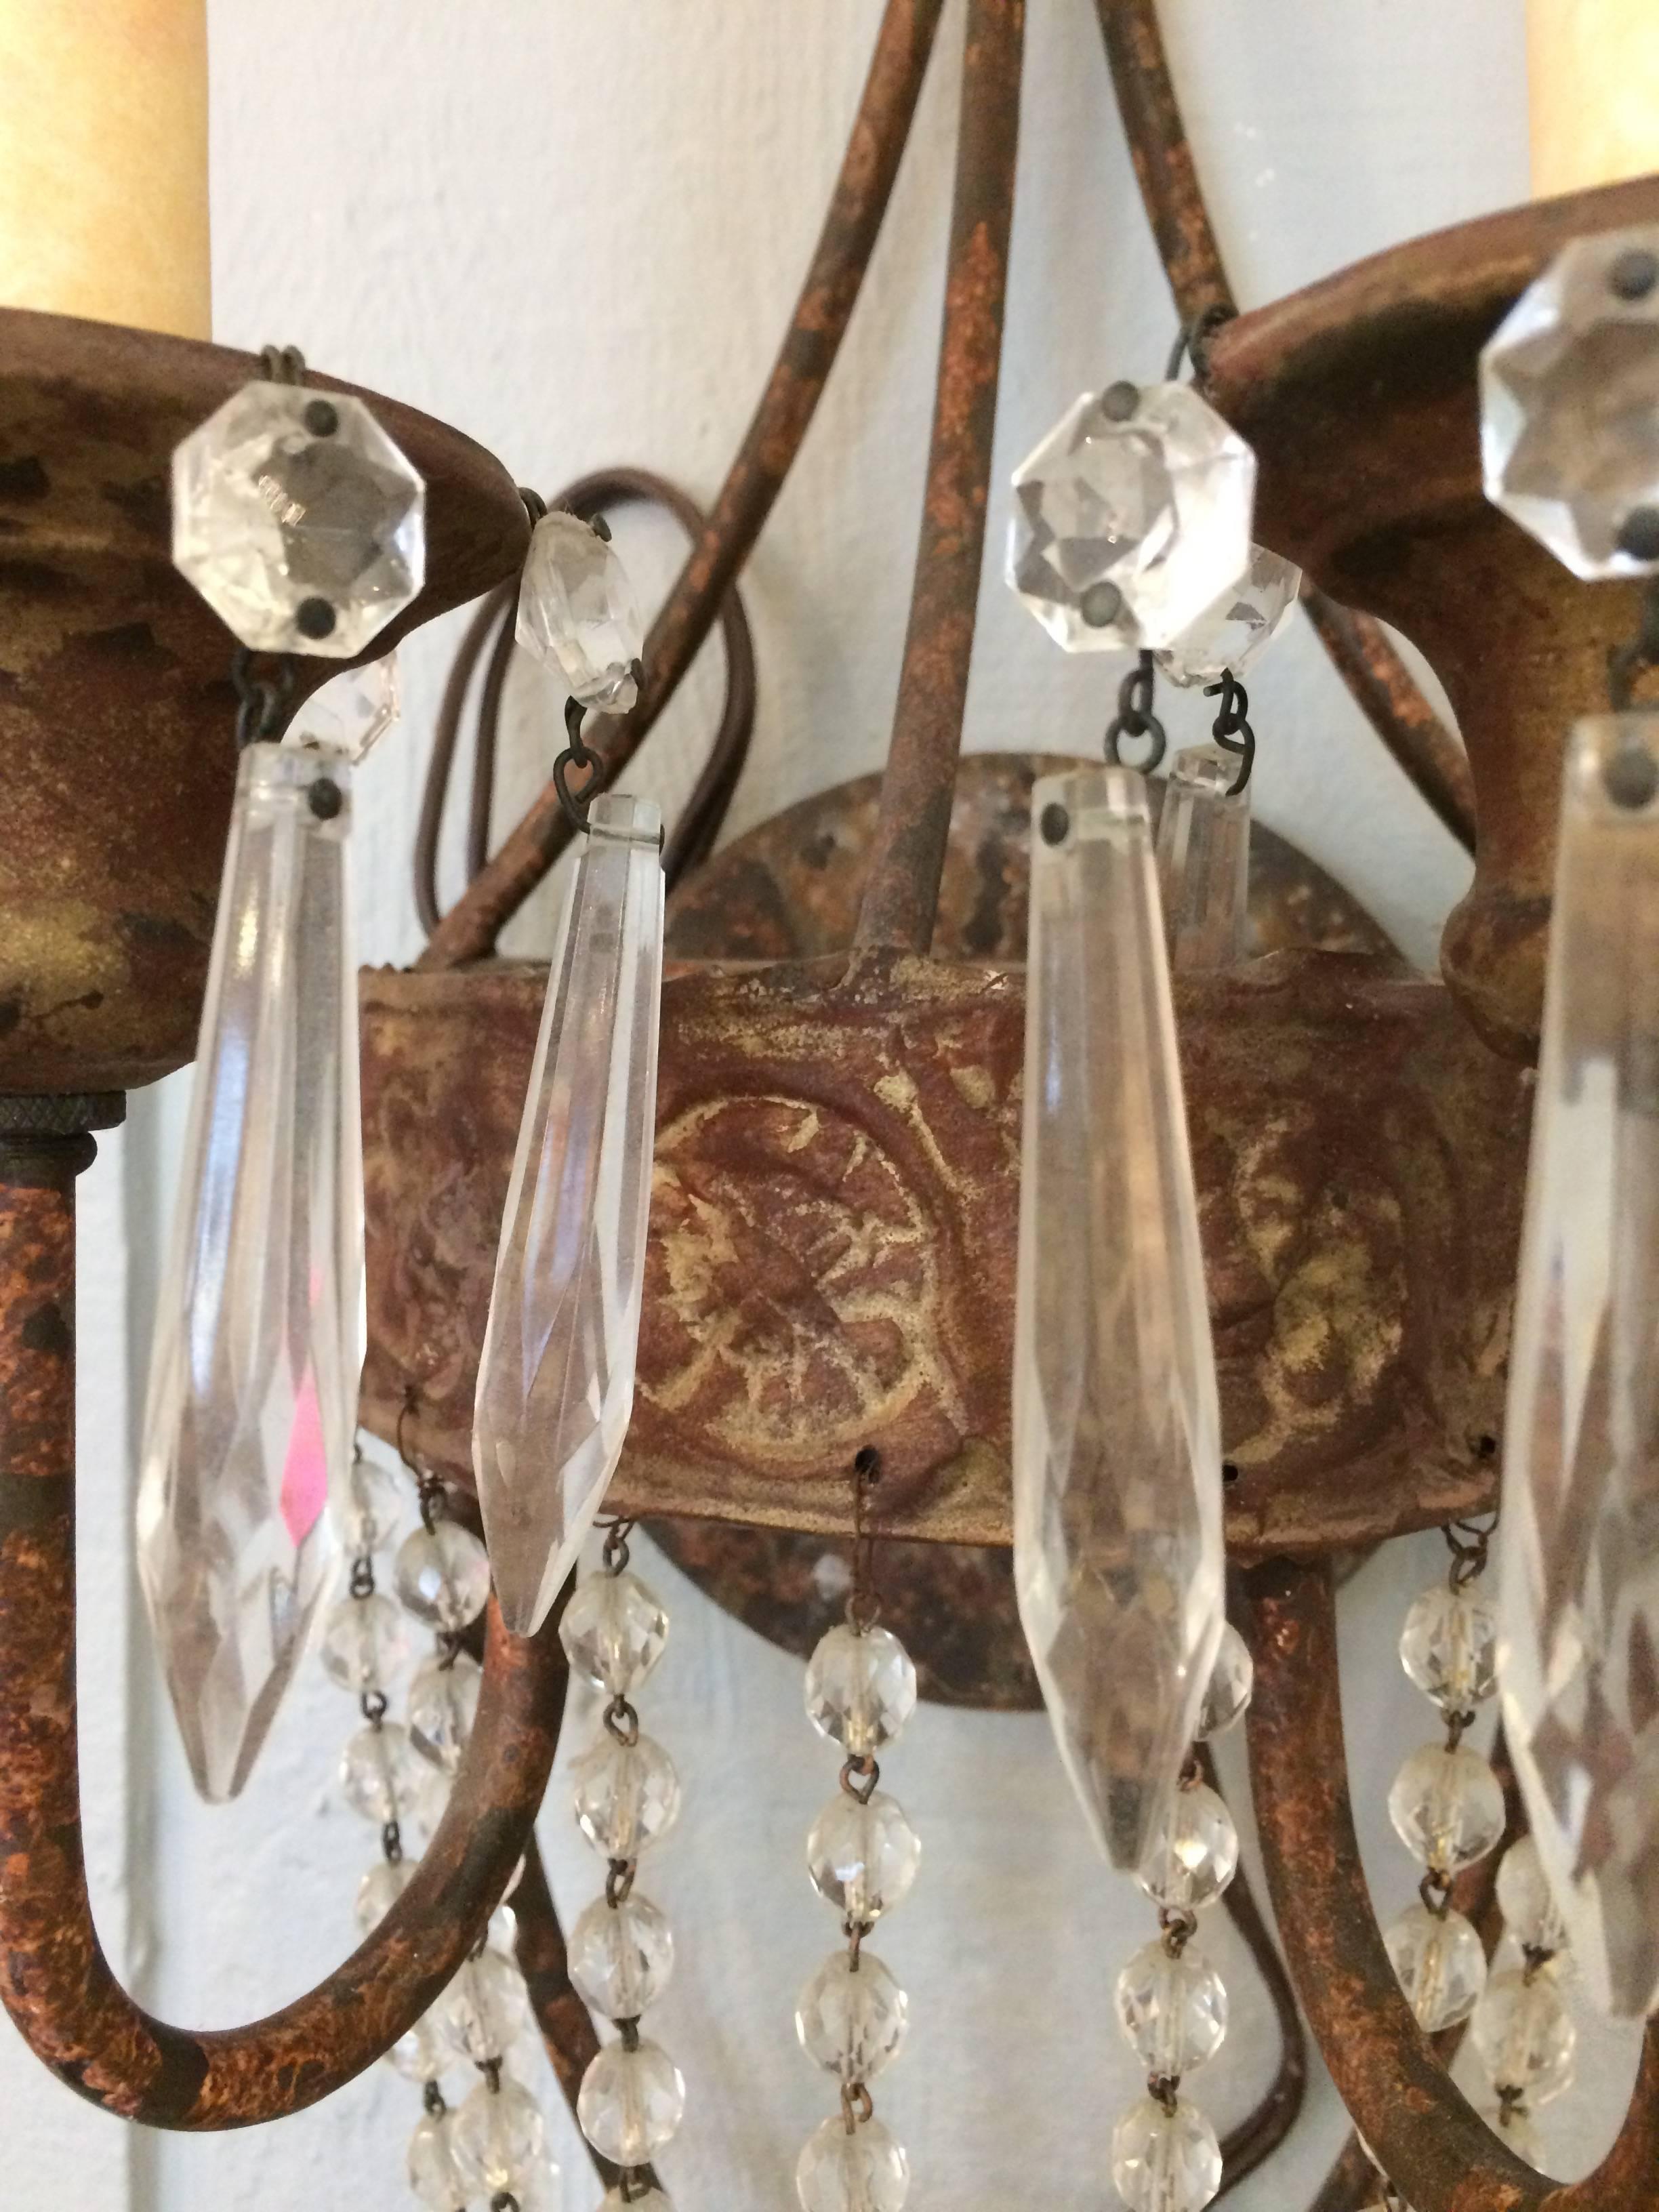 Two iron and tole wall sconces having two arms and a bronze gilt patina as well as lovely cascades of crystals with a jewel of a round prism at the bottom.

Note: There are seven sconces available.